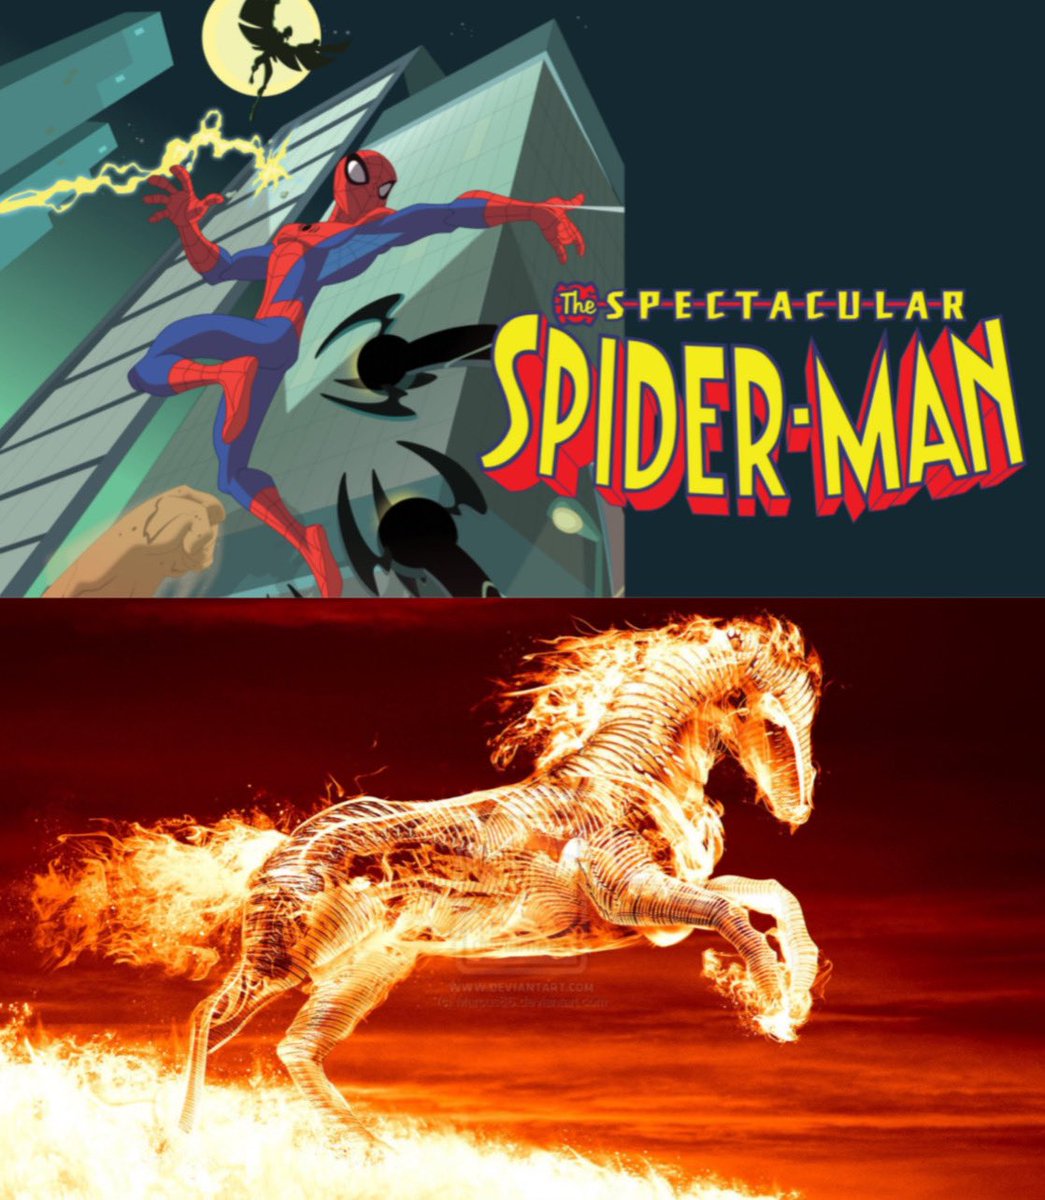 RT @EARTH_26496: Spectacular Spider-Man show be like: https://t.co/E2pEeGMFmB